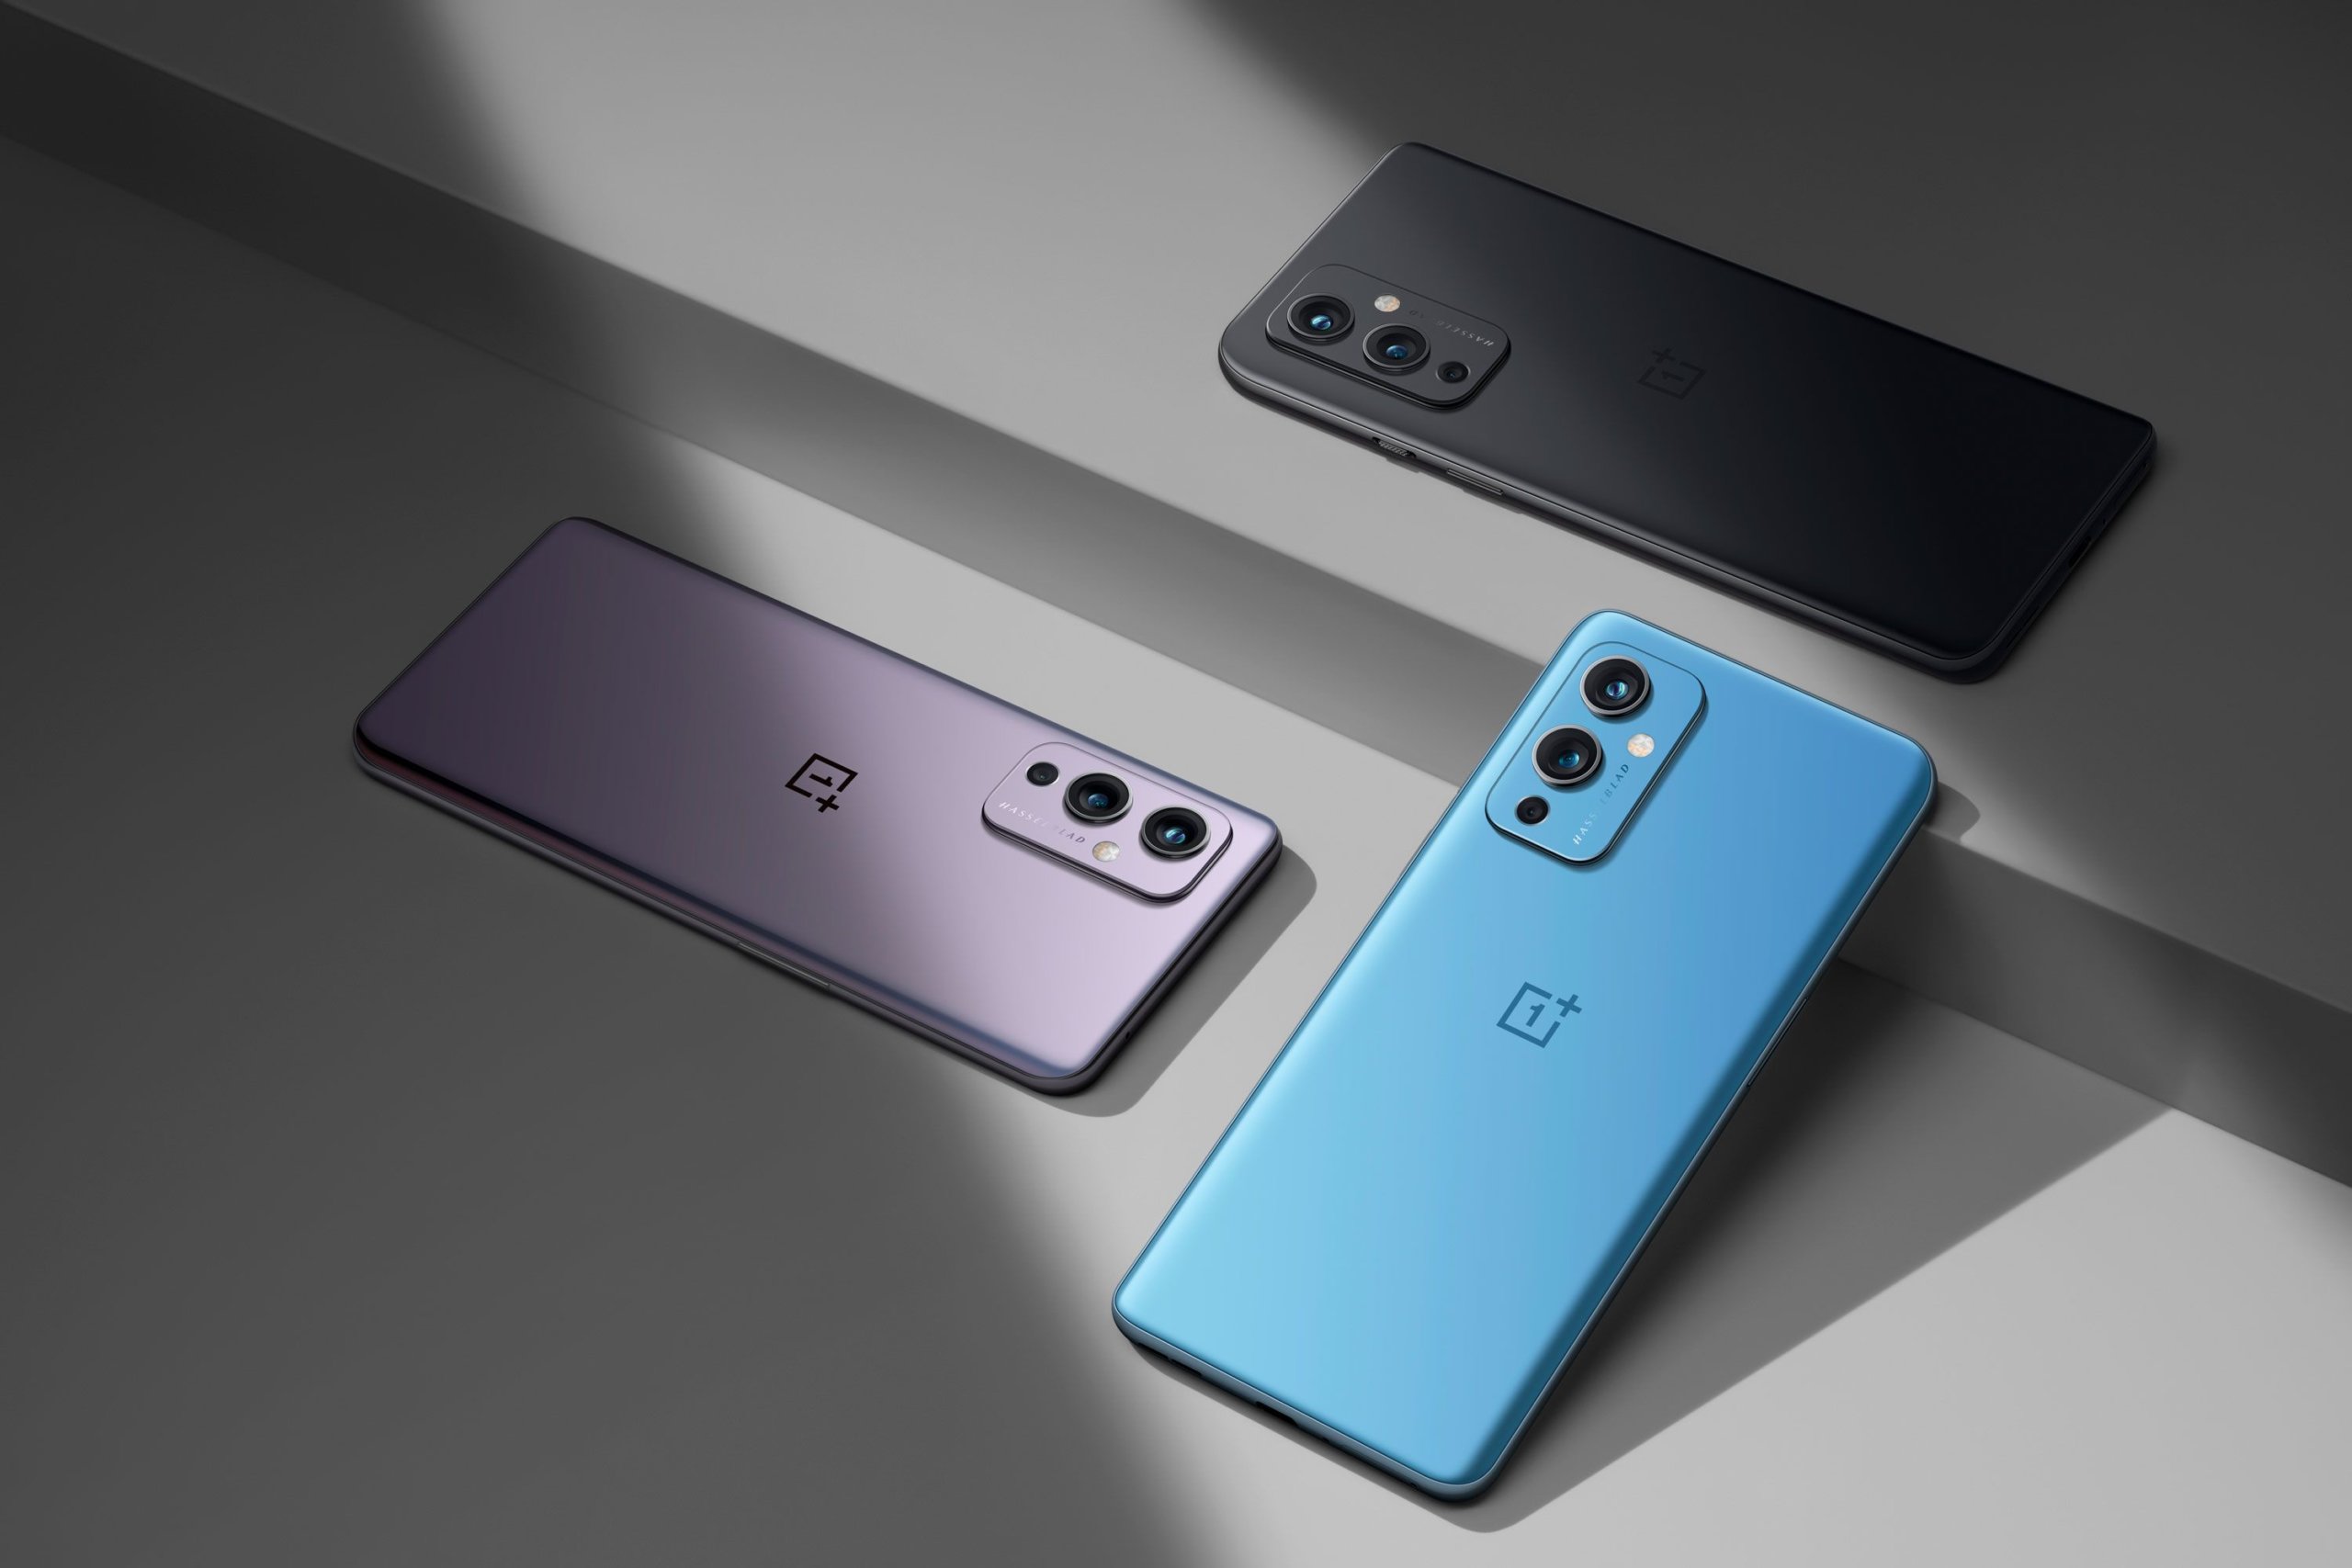 Insider: OnePlus 9RT will cost less than $465 and won't get Android 12 out of the box